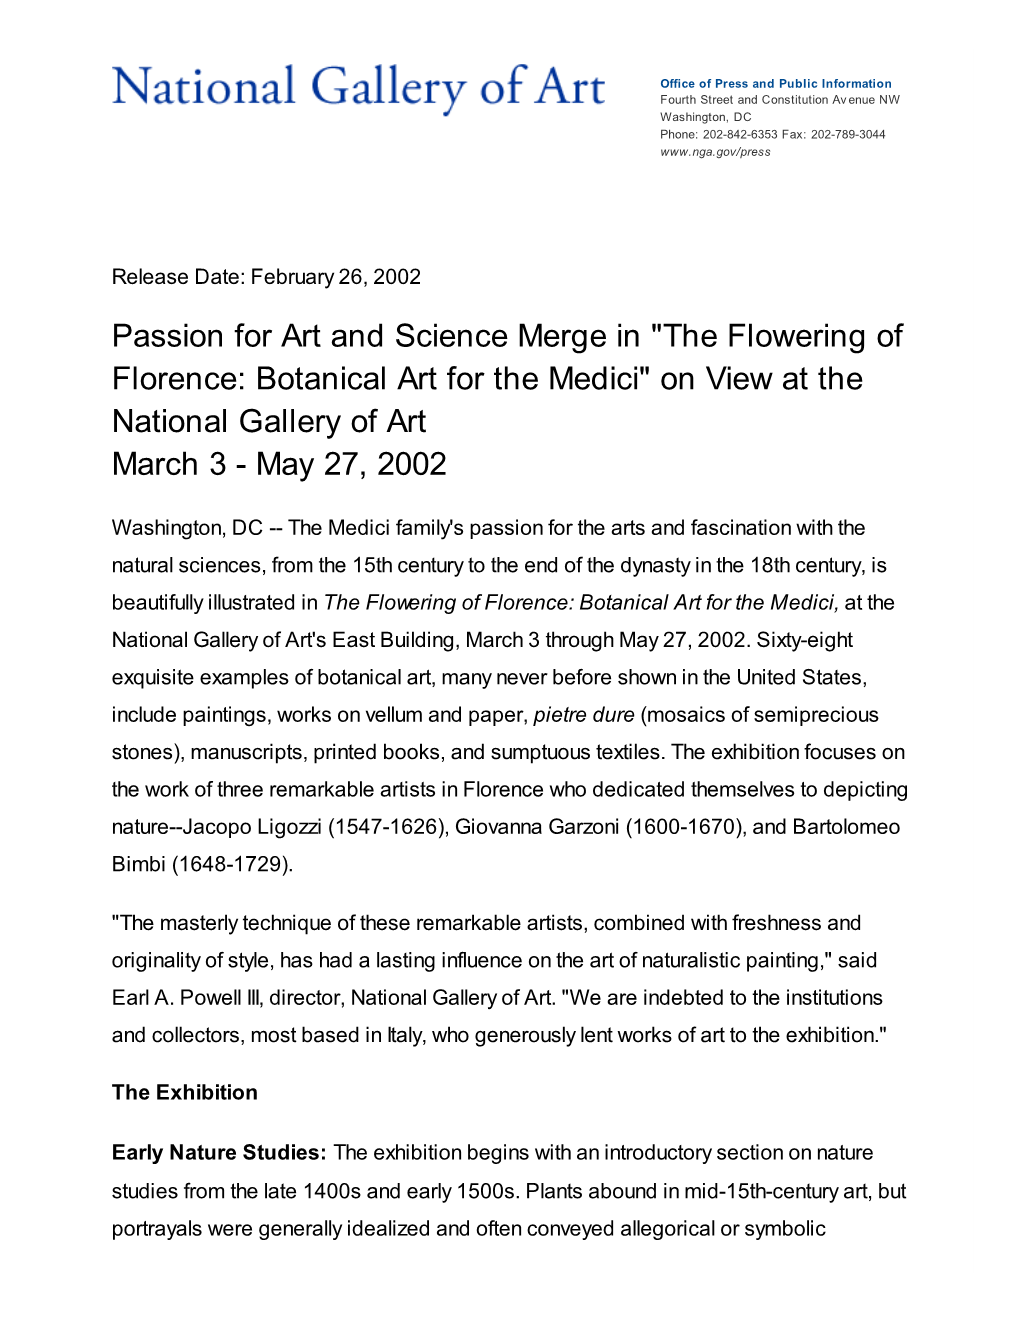 The Flowering of Florence: Botanical Art for the Medici" on View at the National Gallery of Art March 3 - May 27, 2002